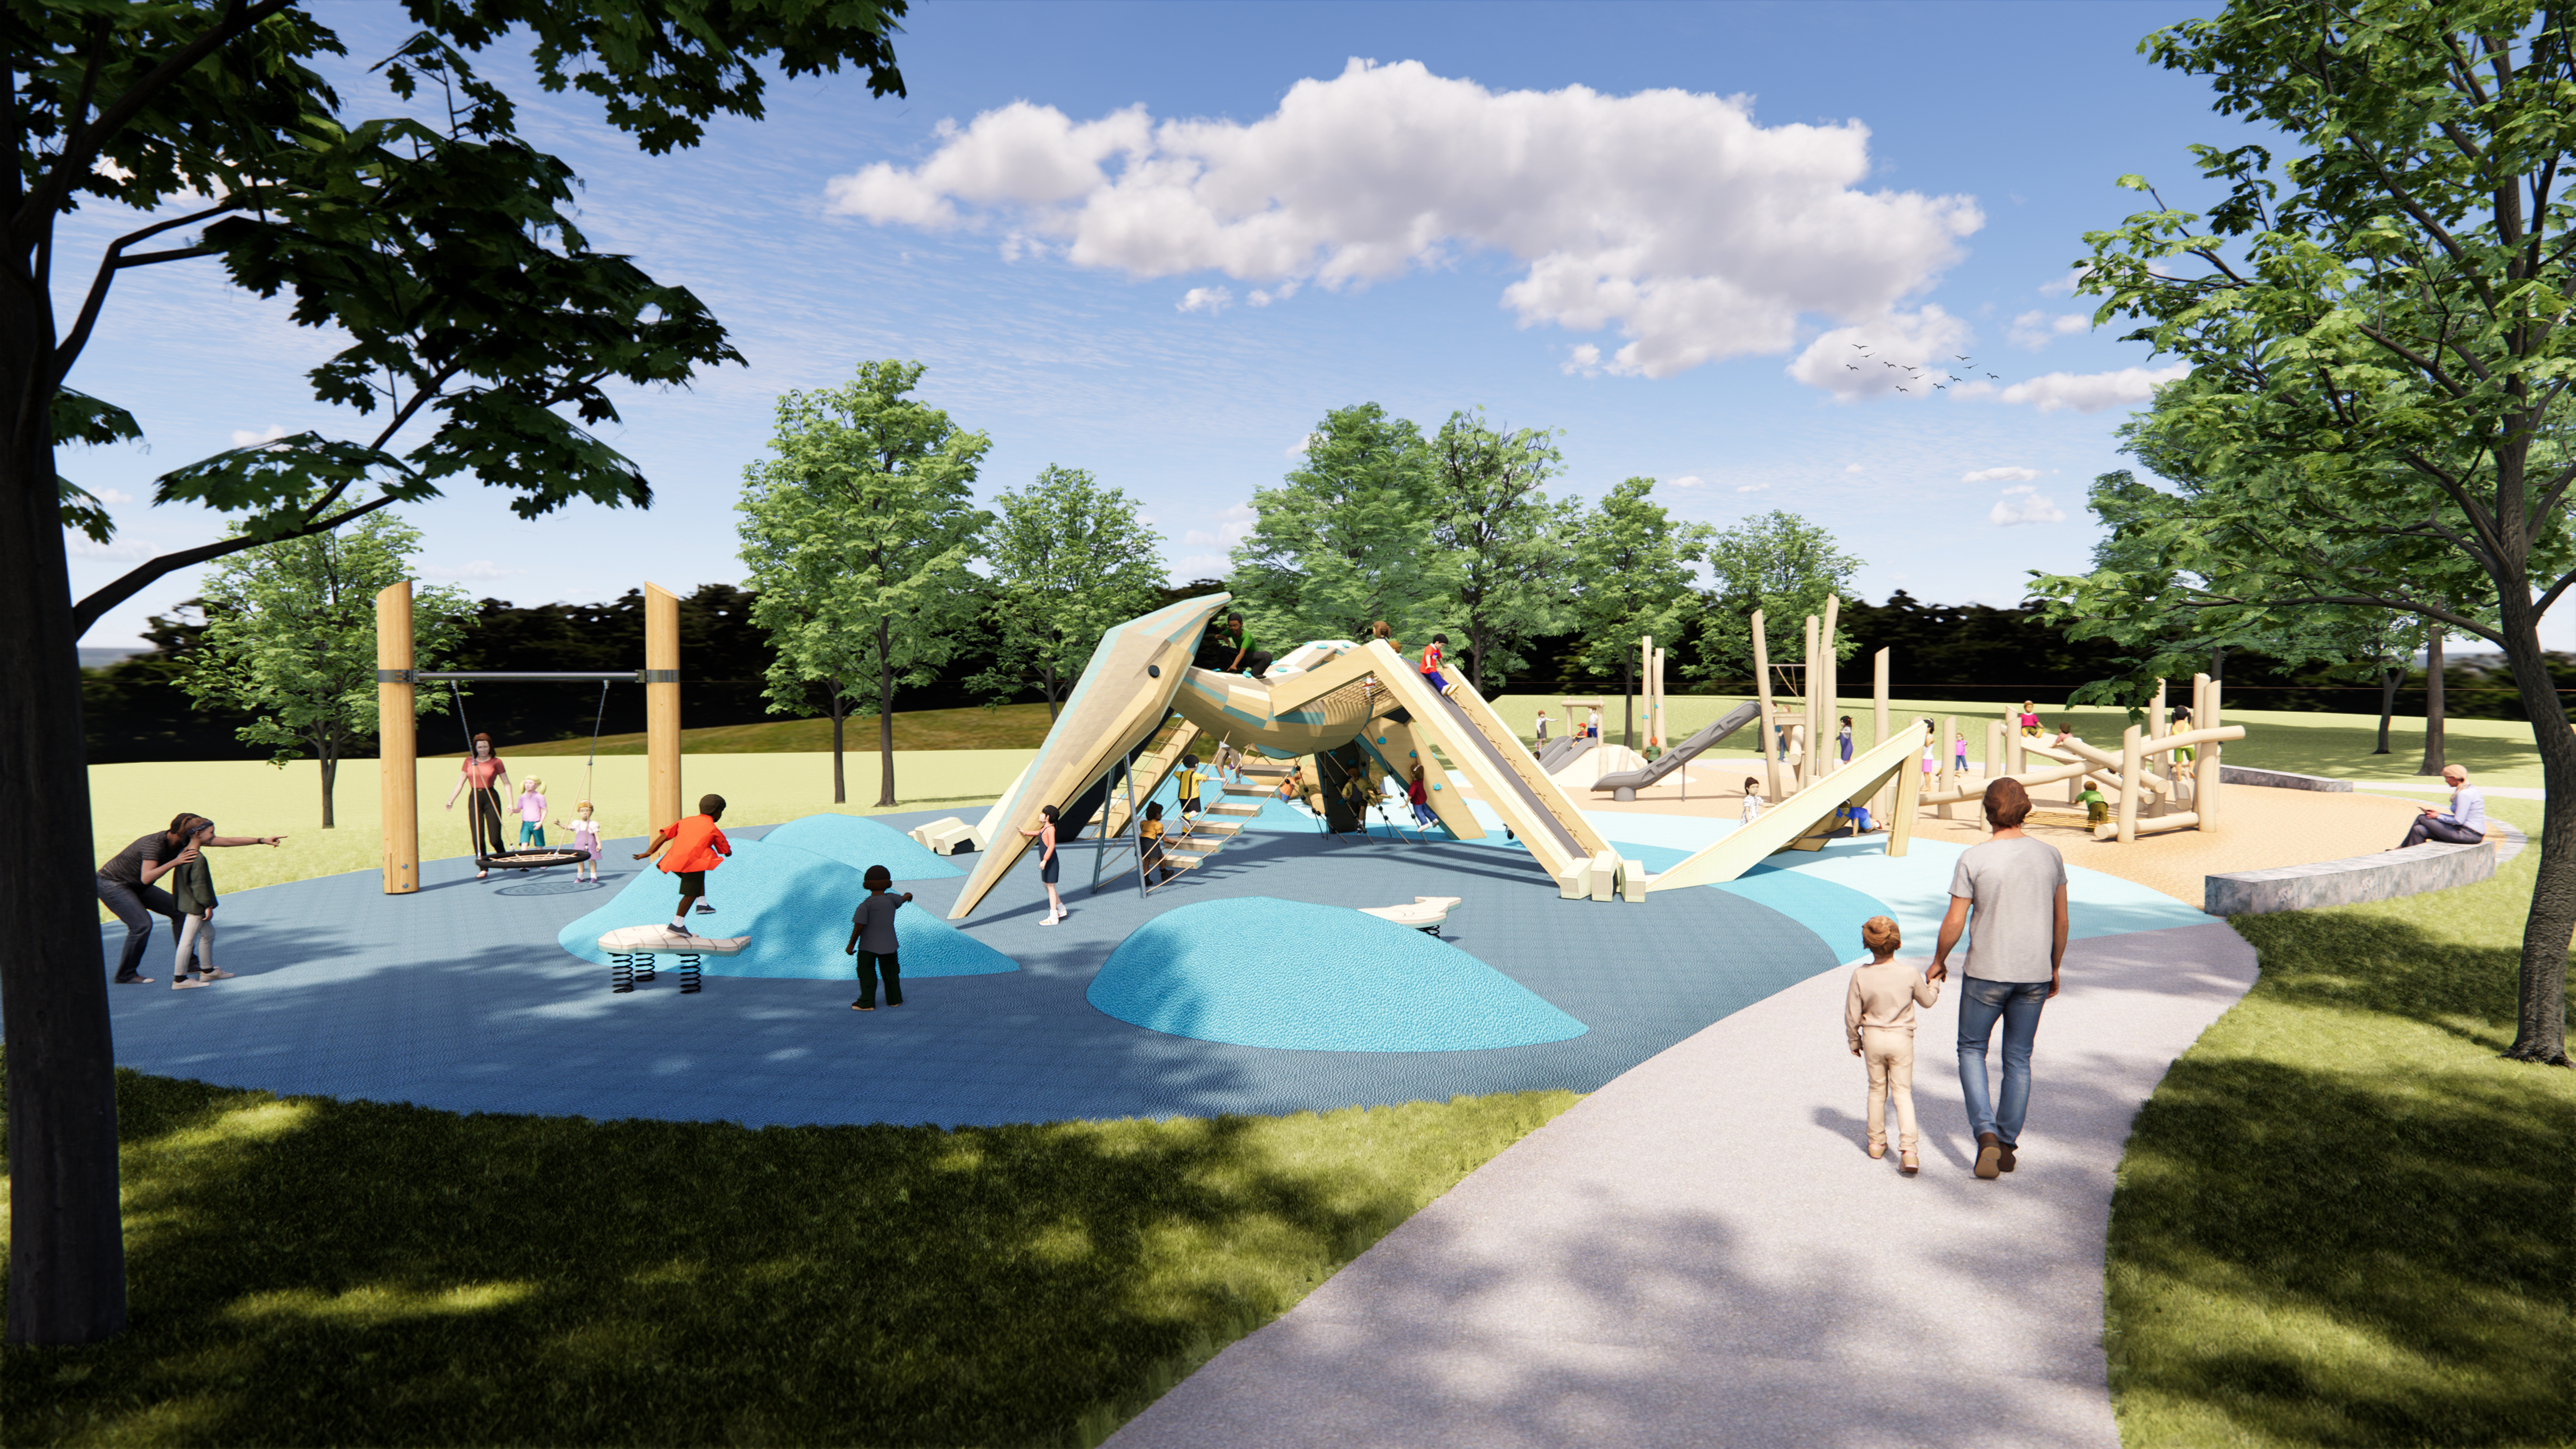 Rendering of a playground at the Jean and Ric Edelman Fossil Park and Museum, a fossil museum in New Jersey scheduled to open next year. 